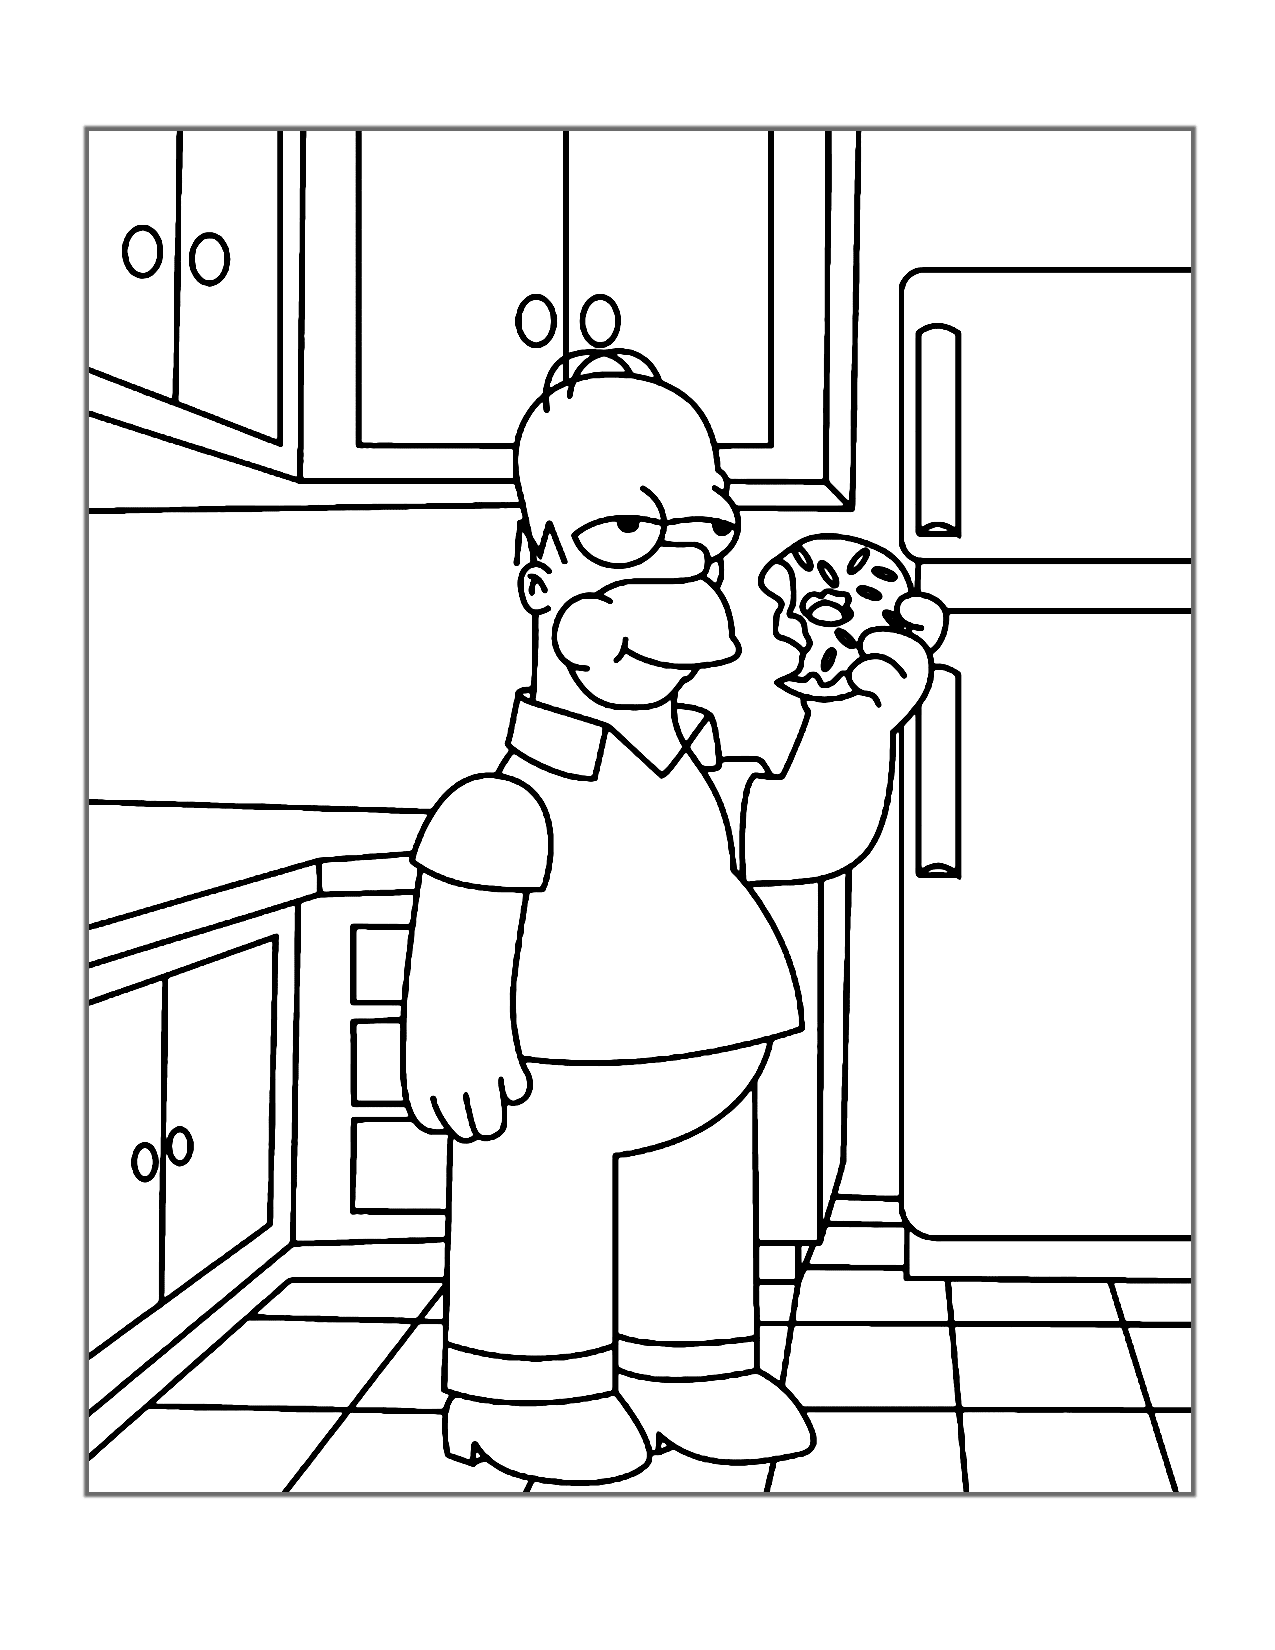 Home Eating A Donut Coloring Page